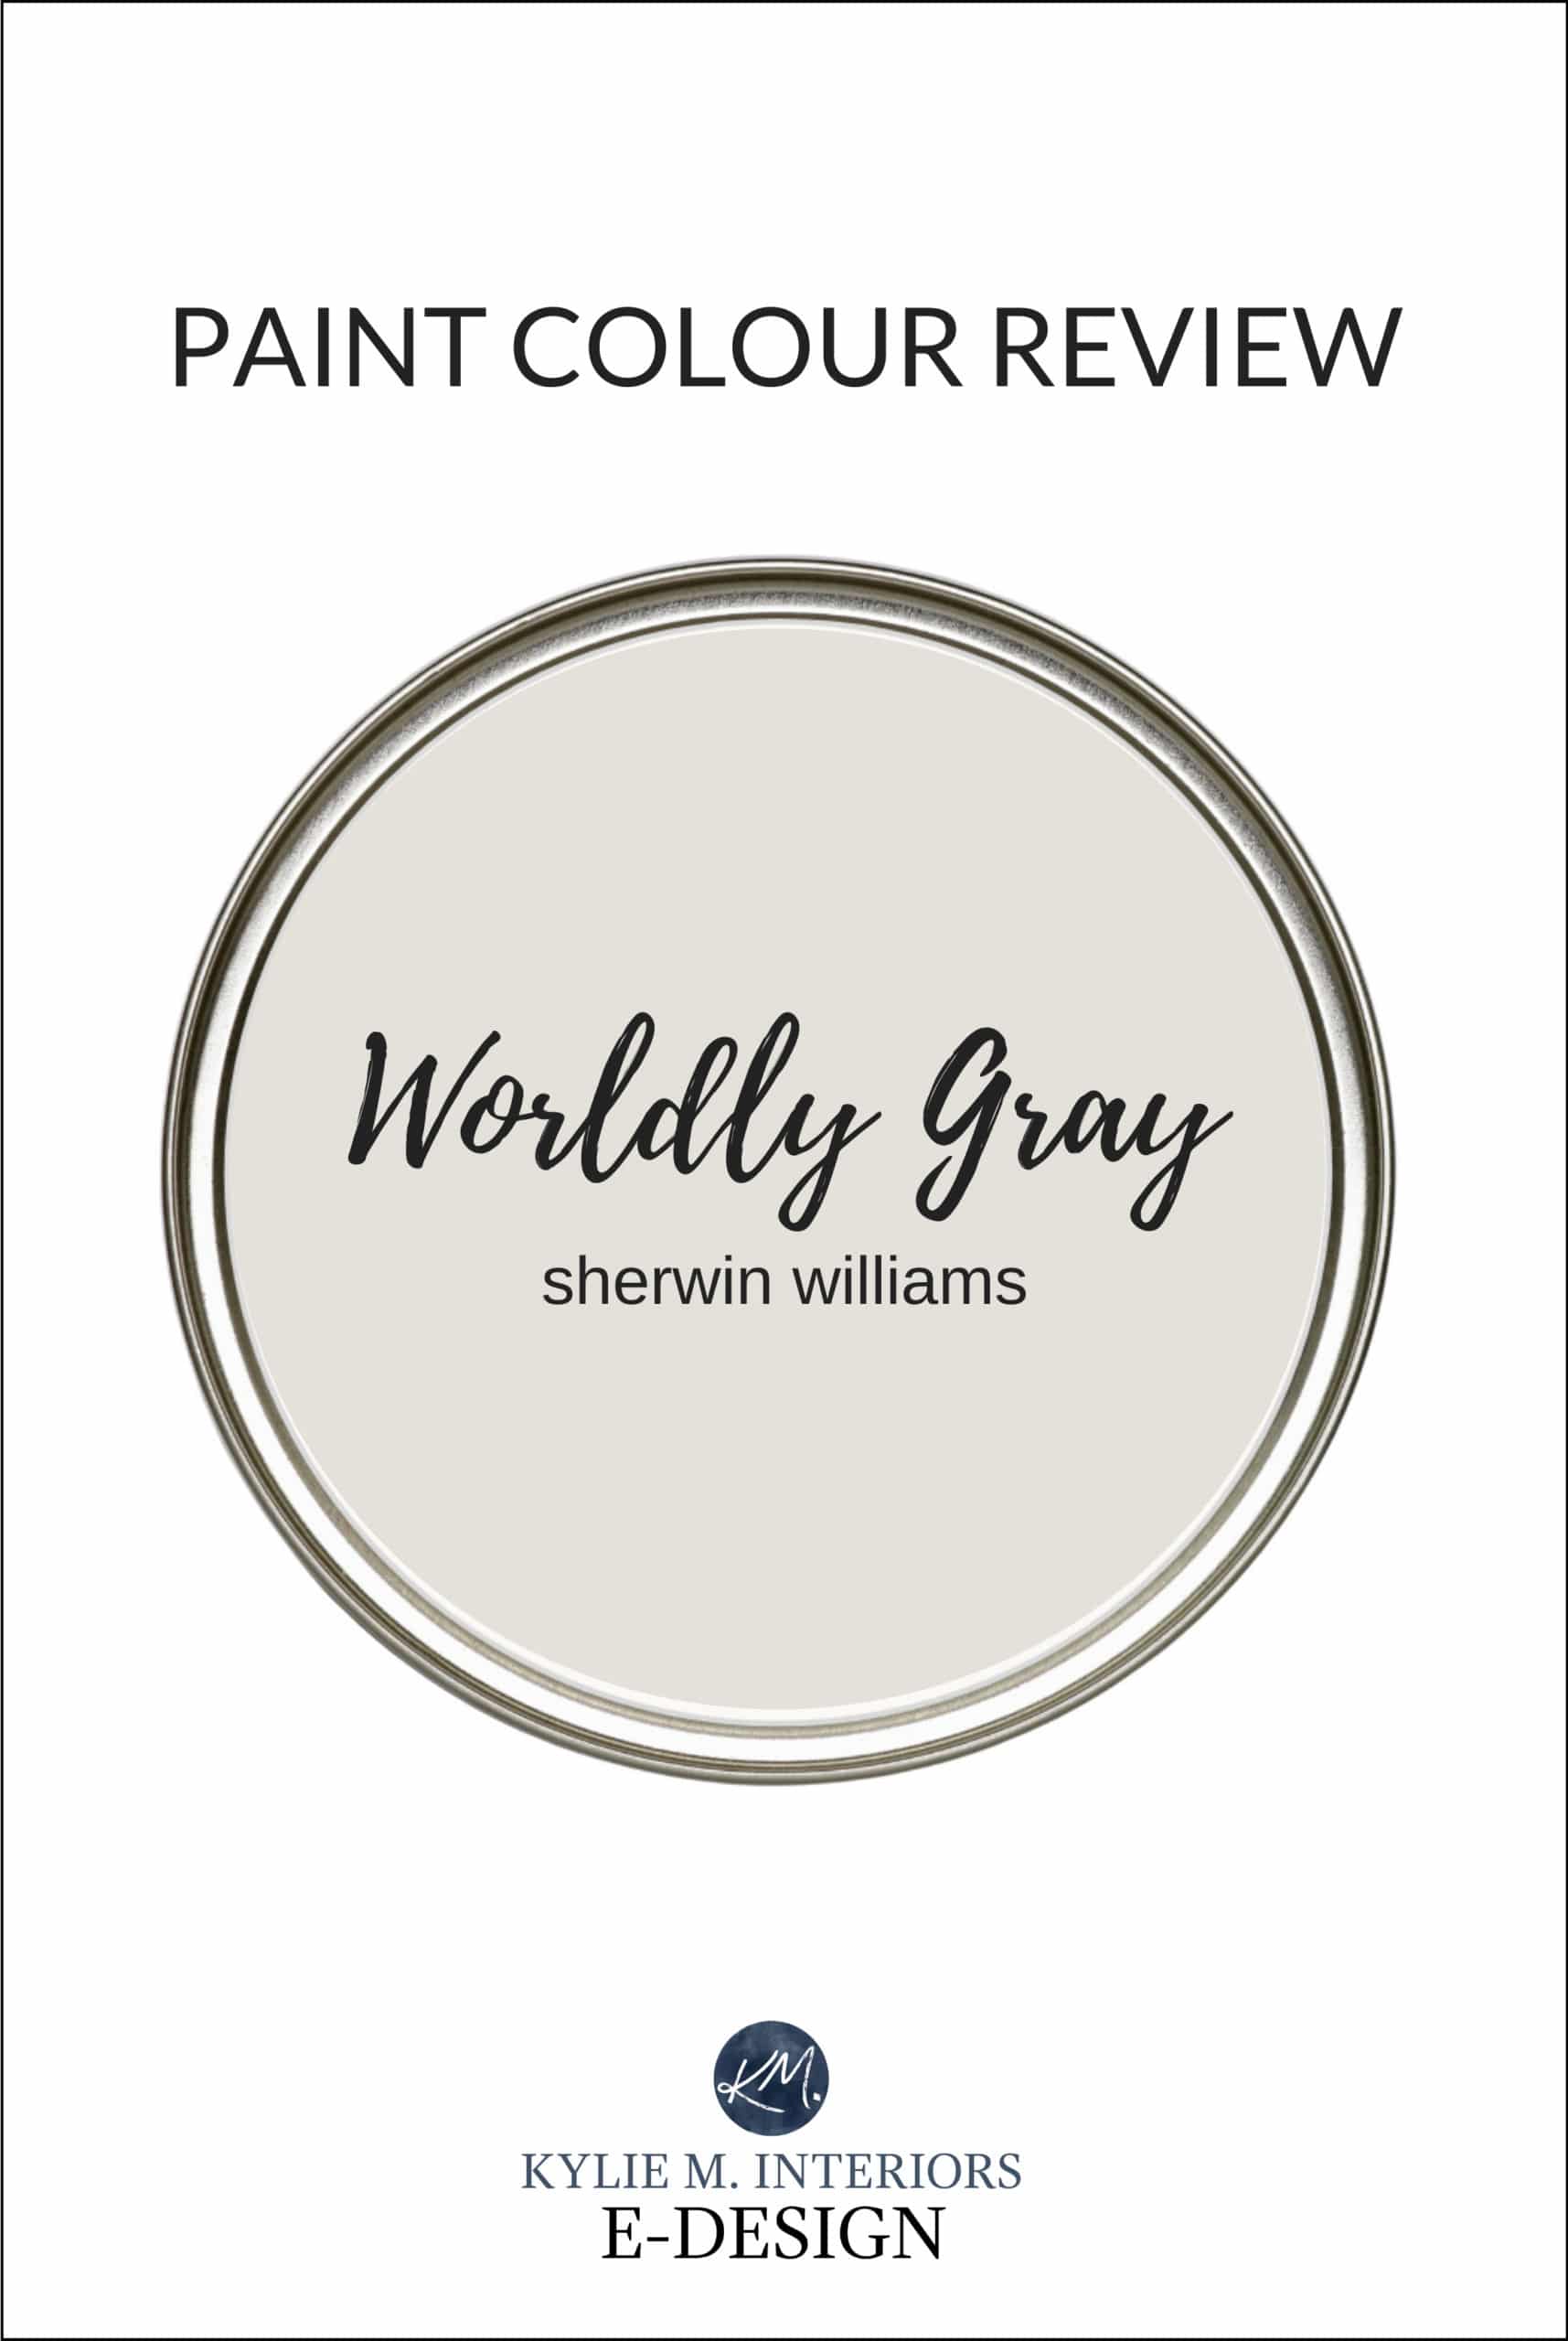 Paint Colour review of the best warm gray greige paint color, Sherwin Williams Worldly Gray. Kylie M Interiors Edesign, online color expert